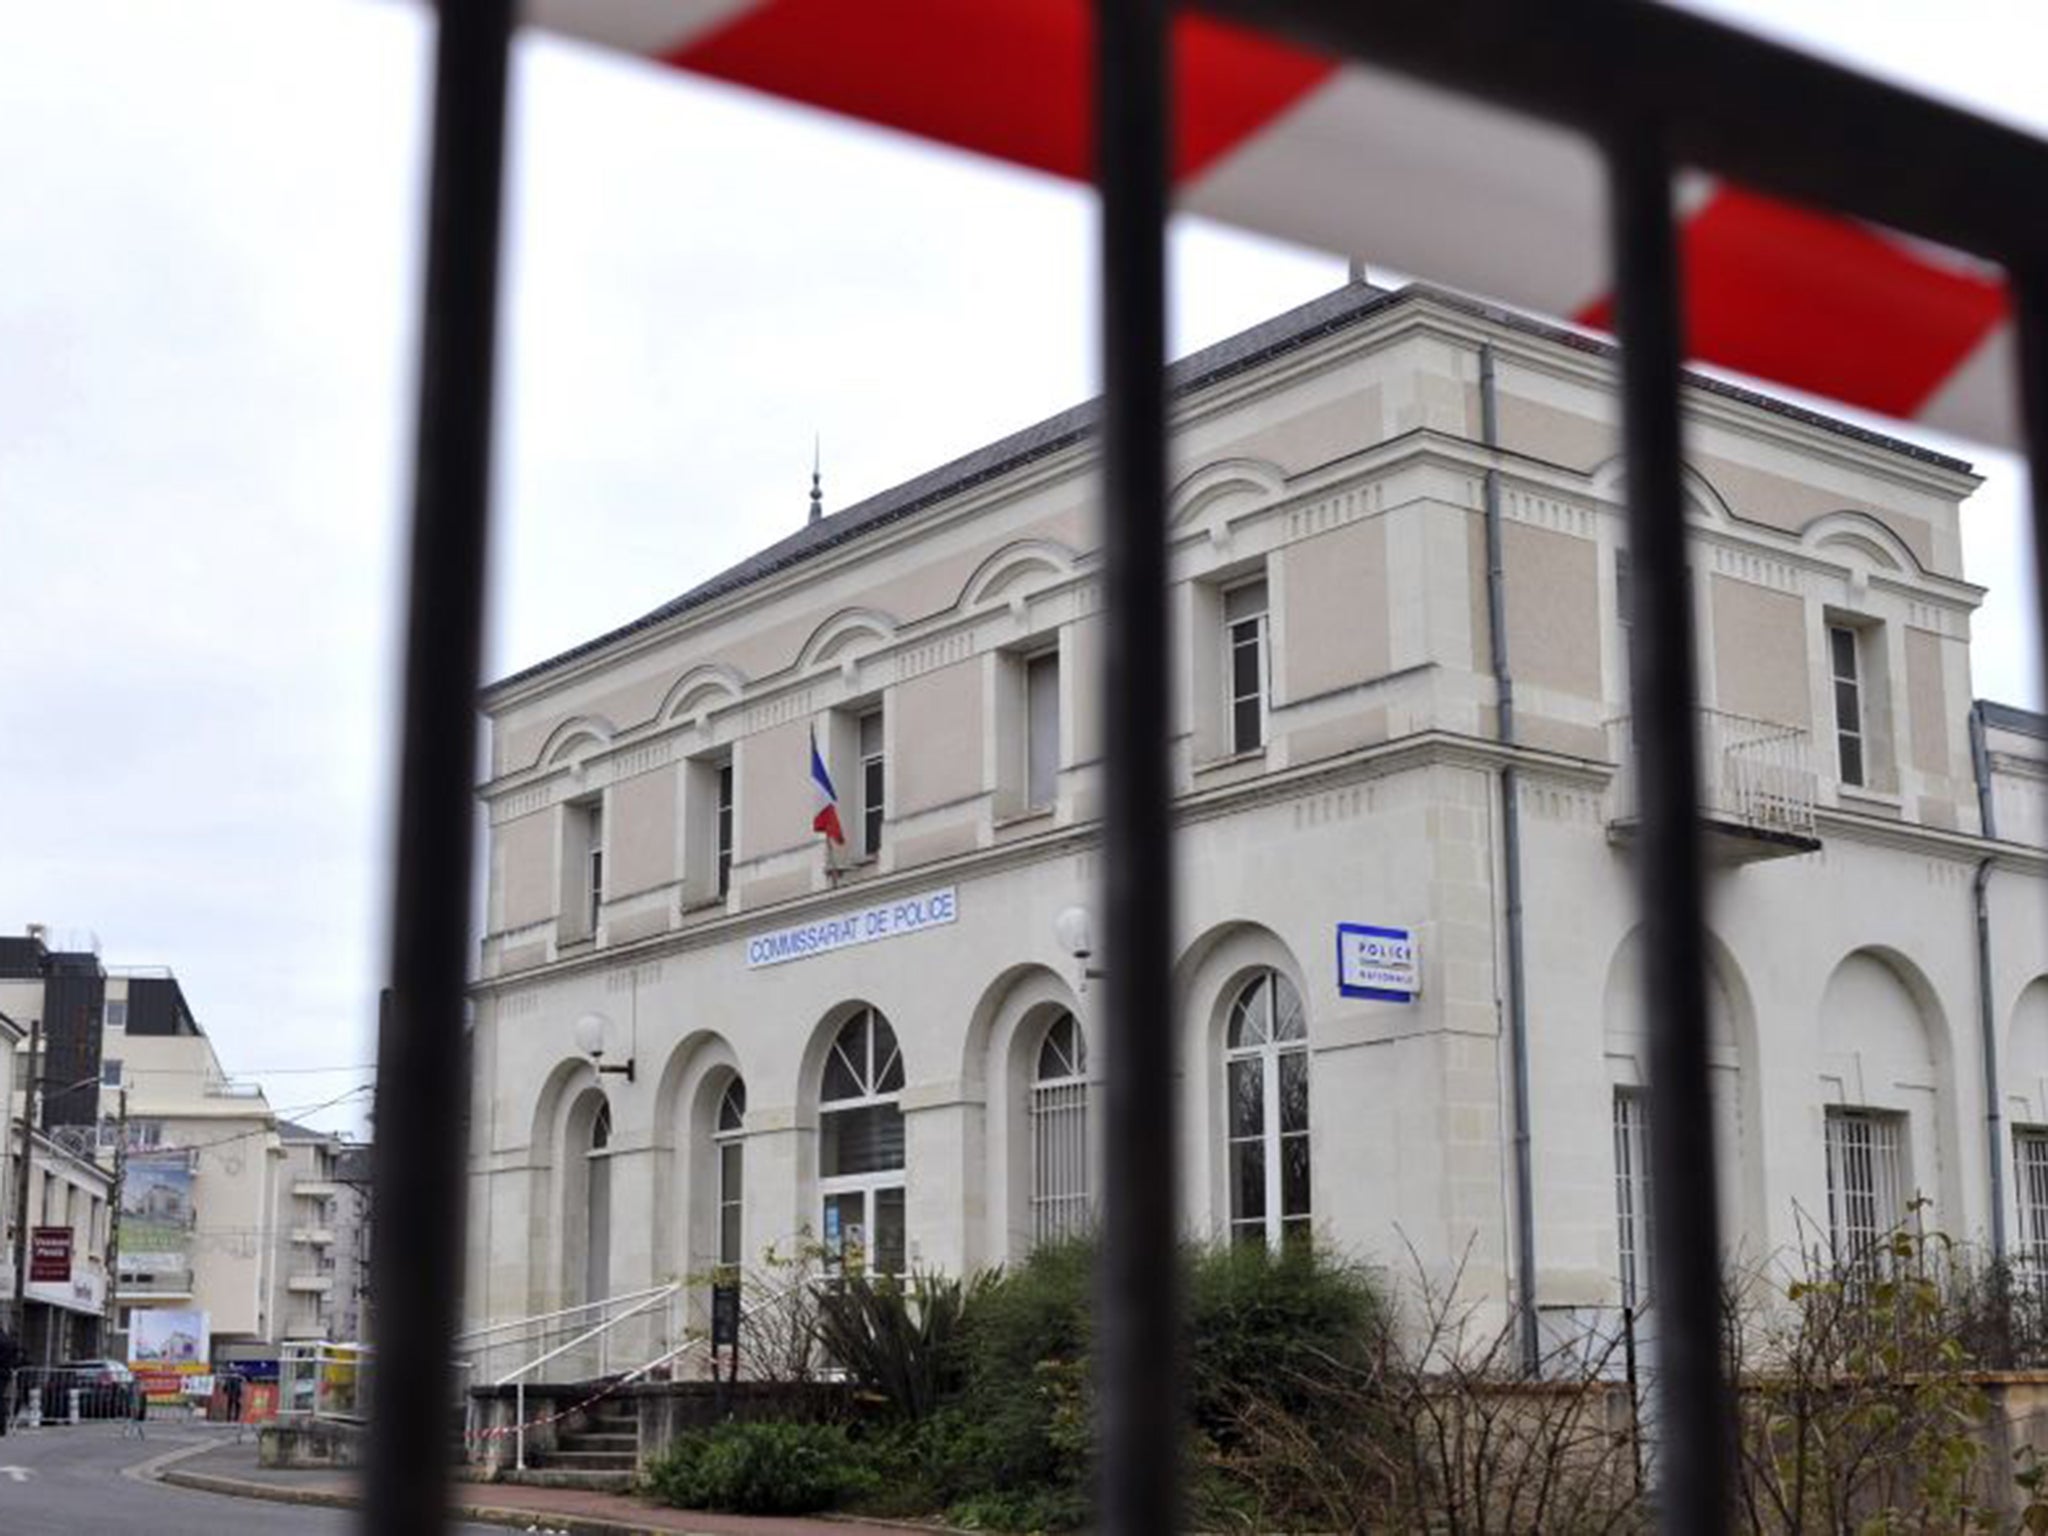 The police station in Joue-les-Tours, where French police shot dead a man who attacked them with a knife while shouting "Allahu Akbar" ("God is great")